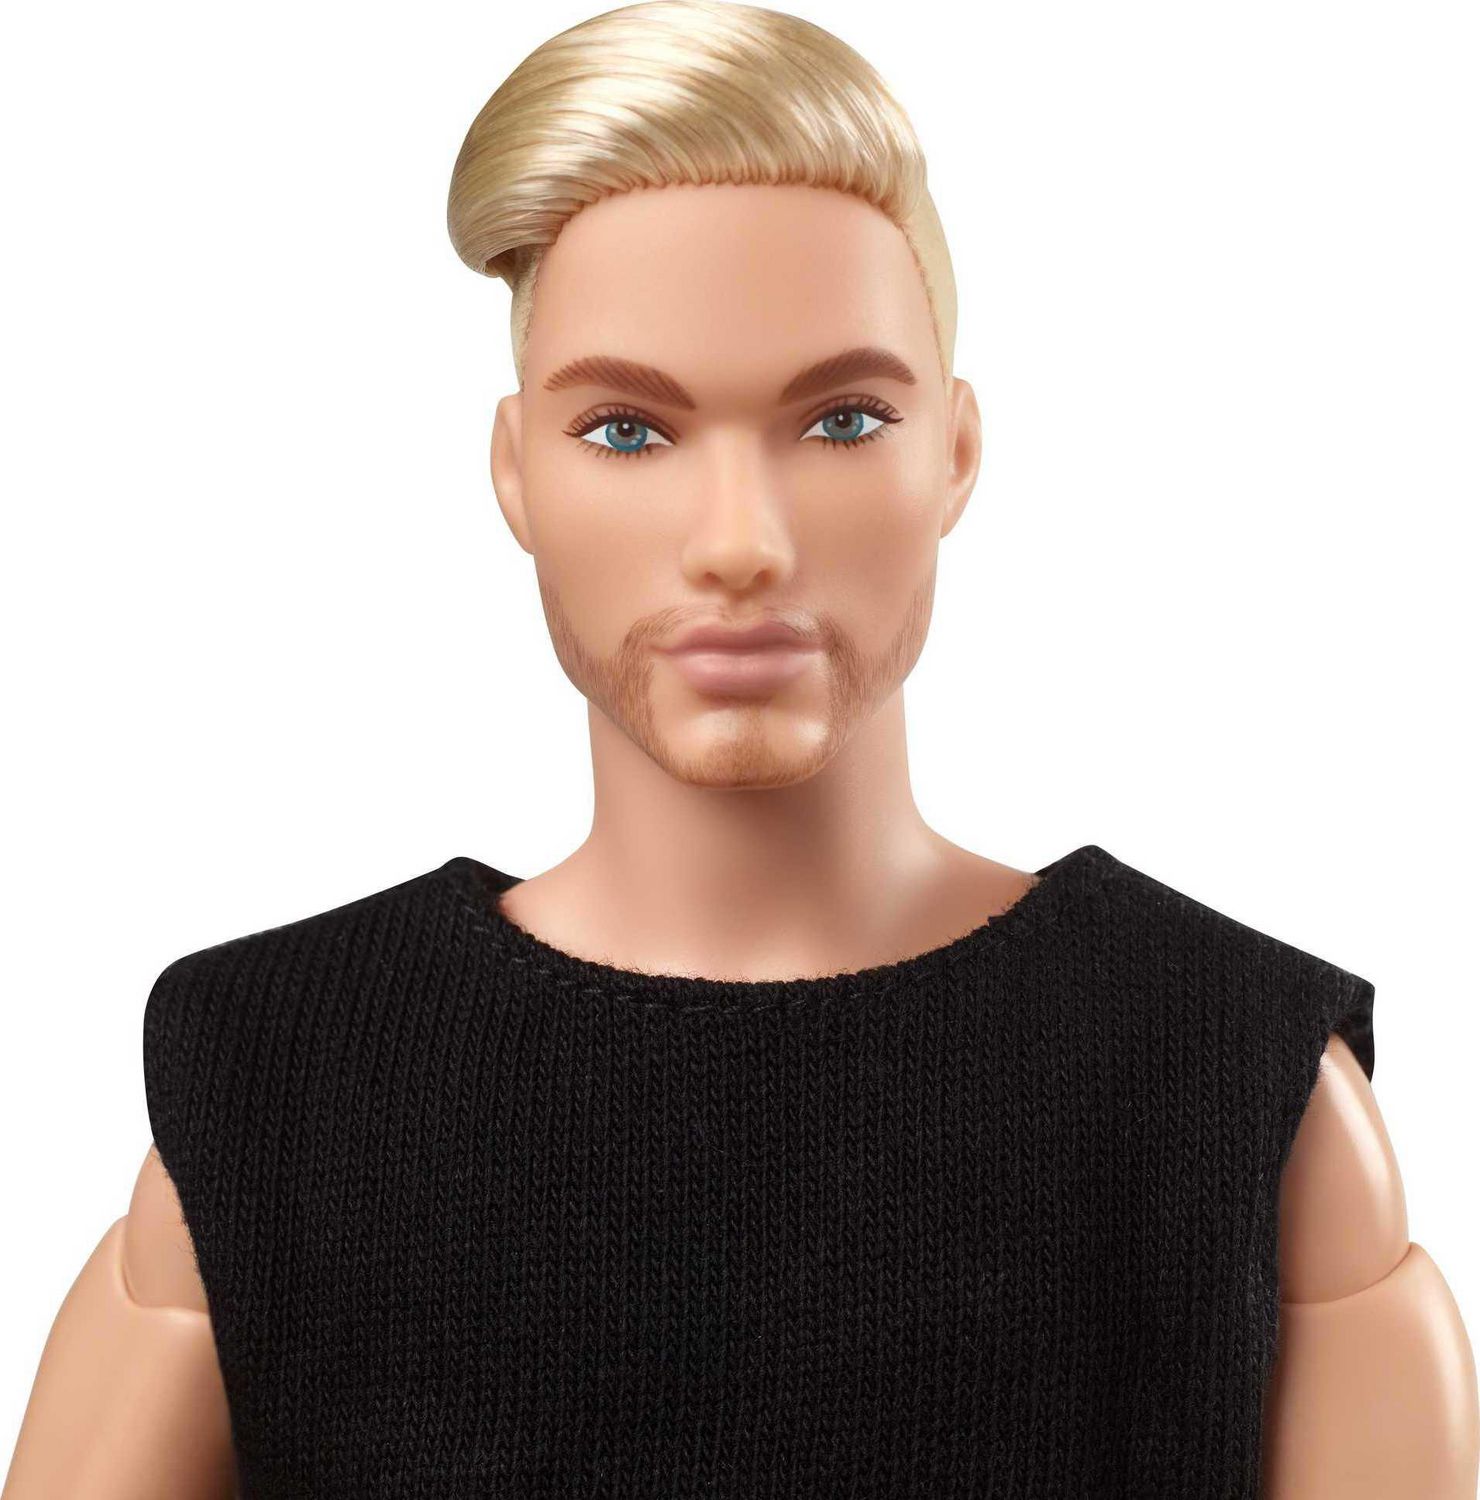 Barbie Signature Barbie Looks Ken Doll (Blonde with Facial Hair